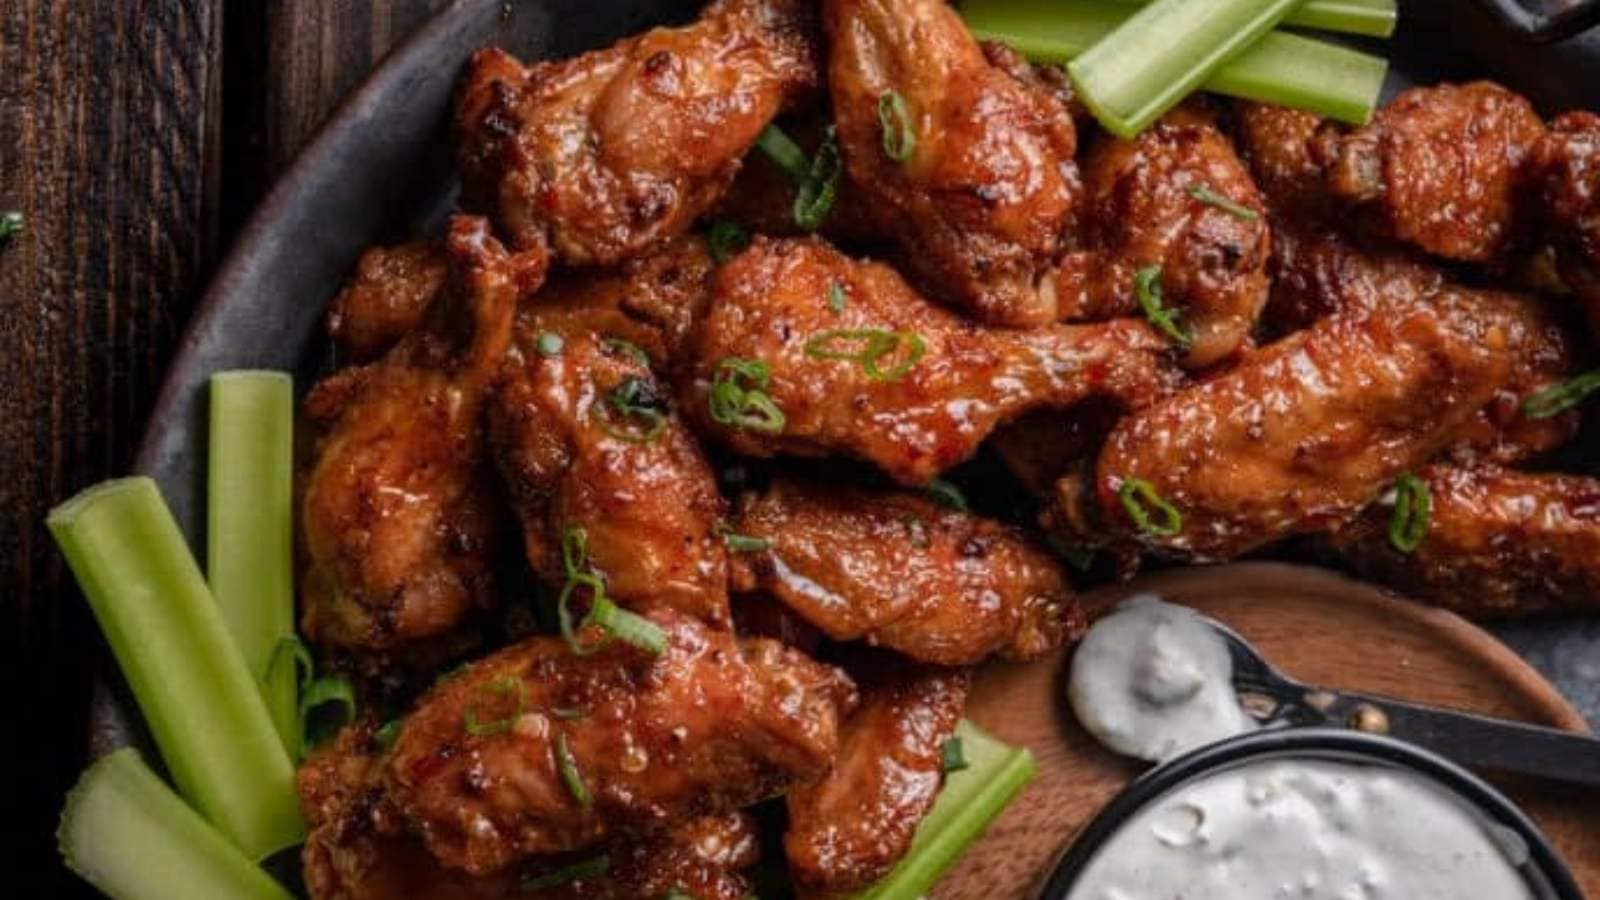 Baked Whiskey Glazed Hot Wings recipe by Cooking With Wine.